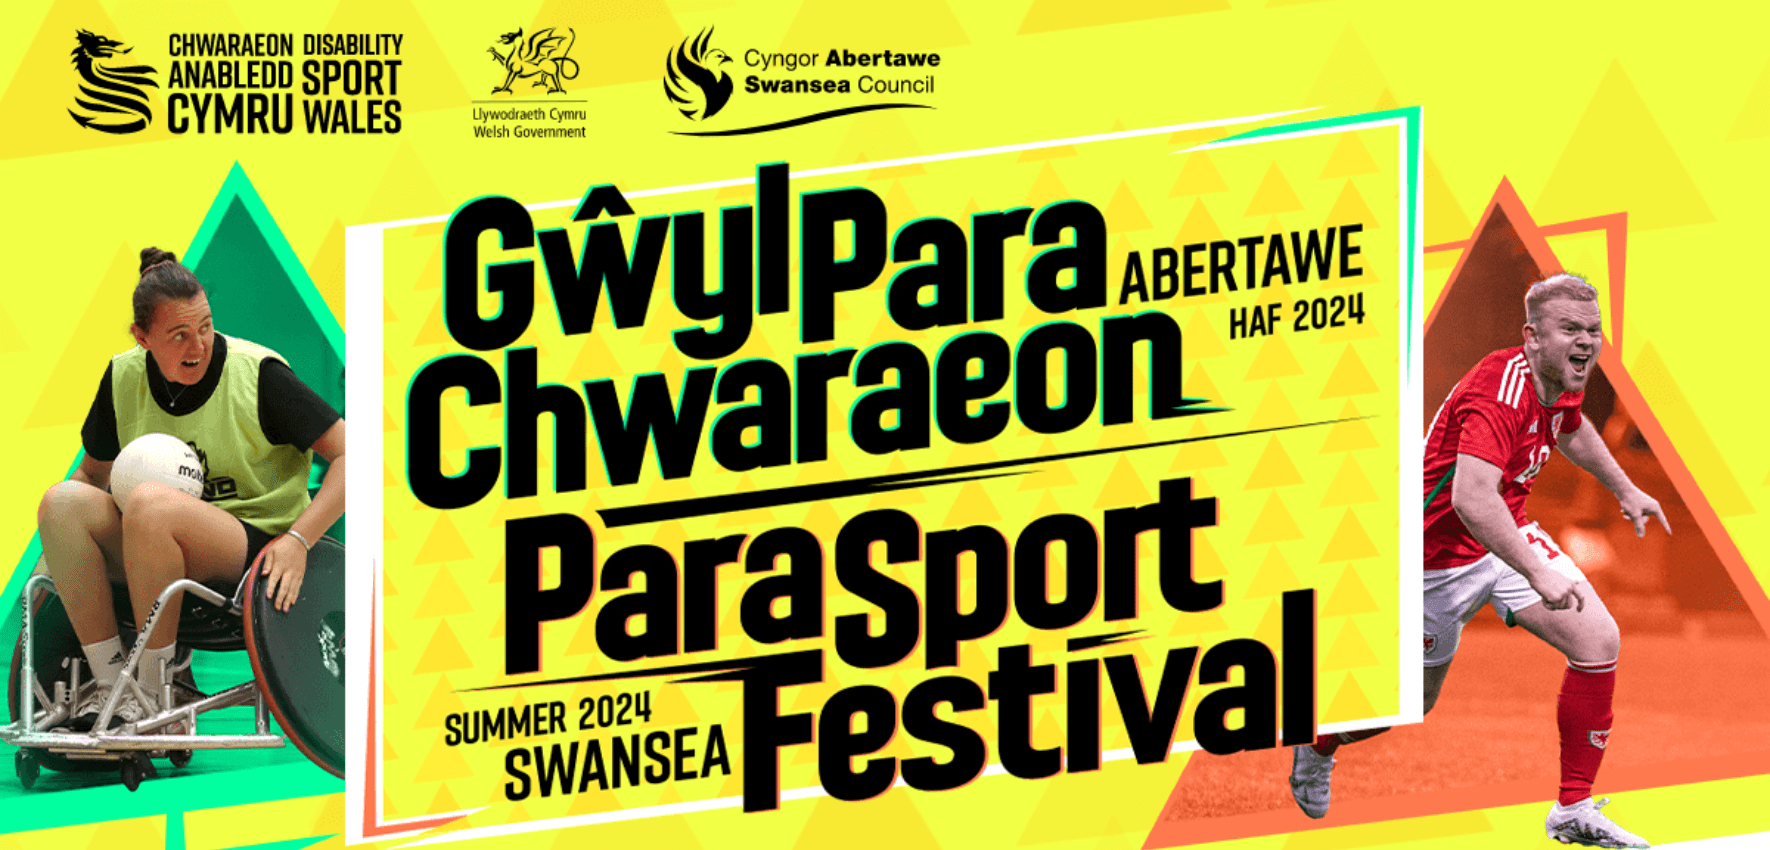 Parasport Festival Logo with images of athletes competing